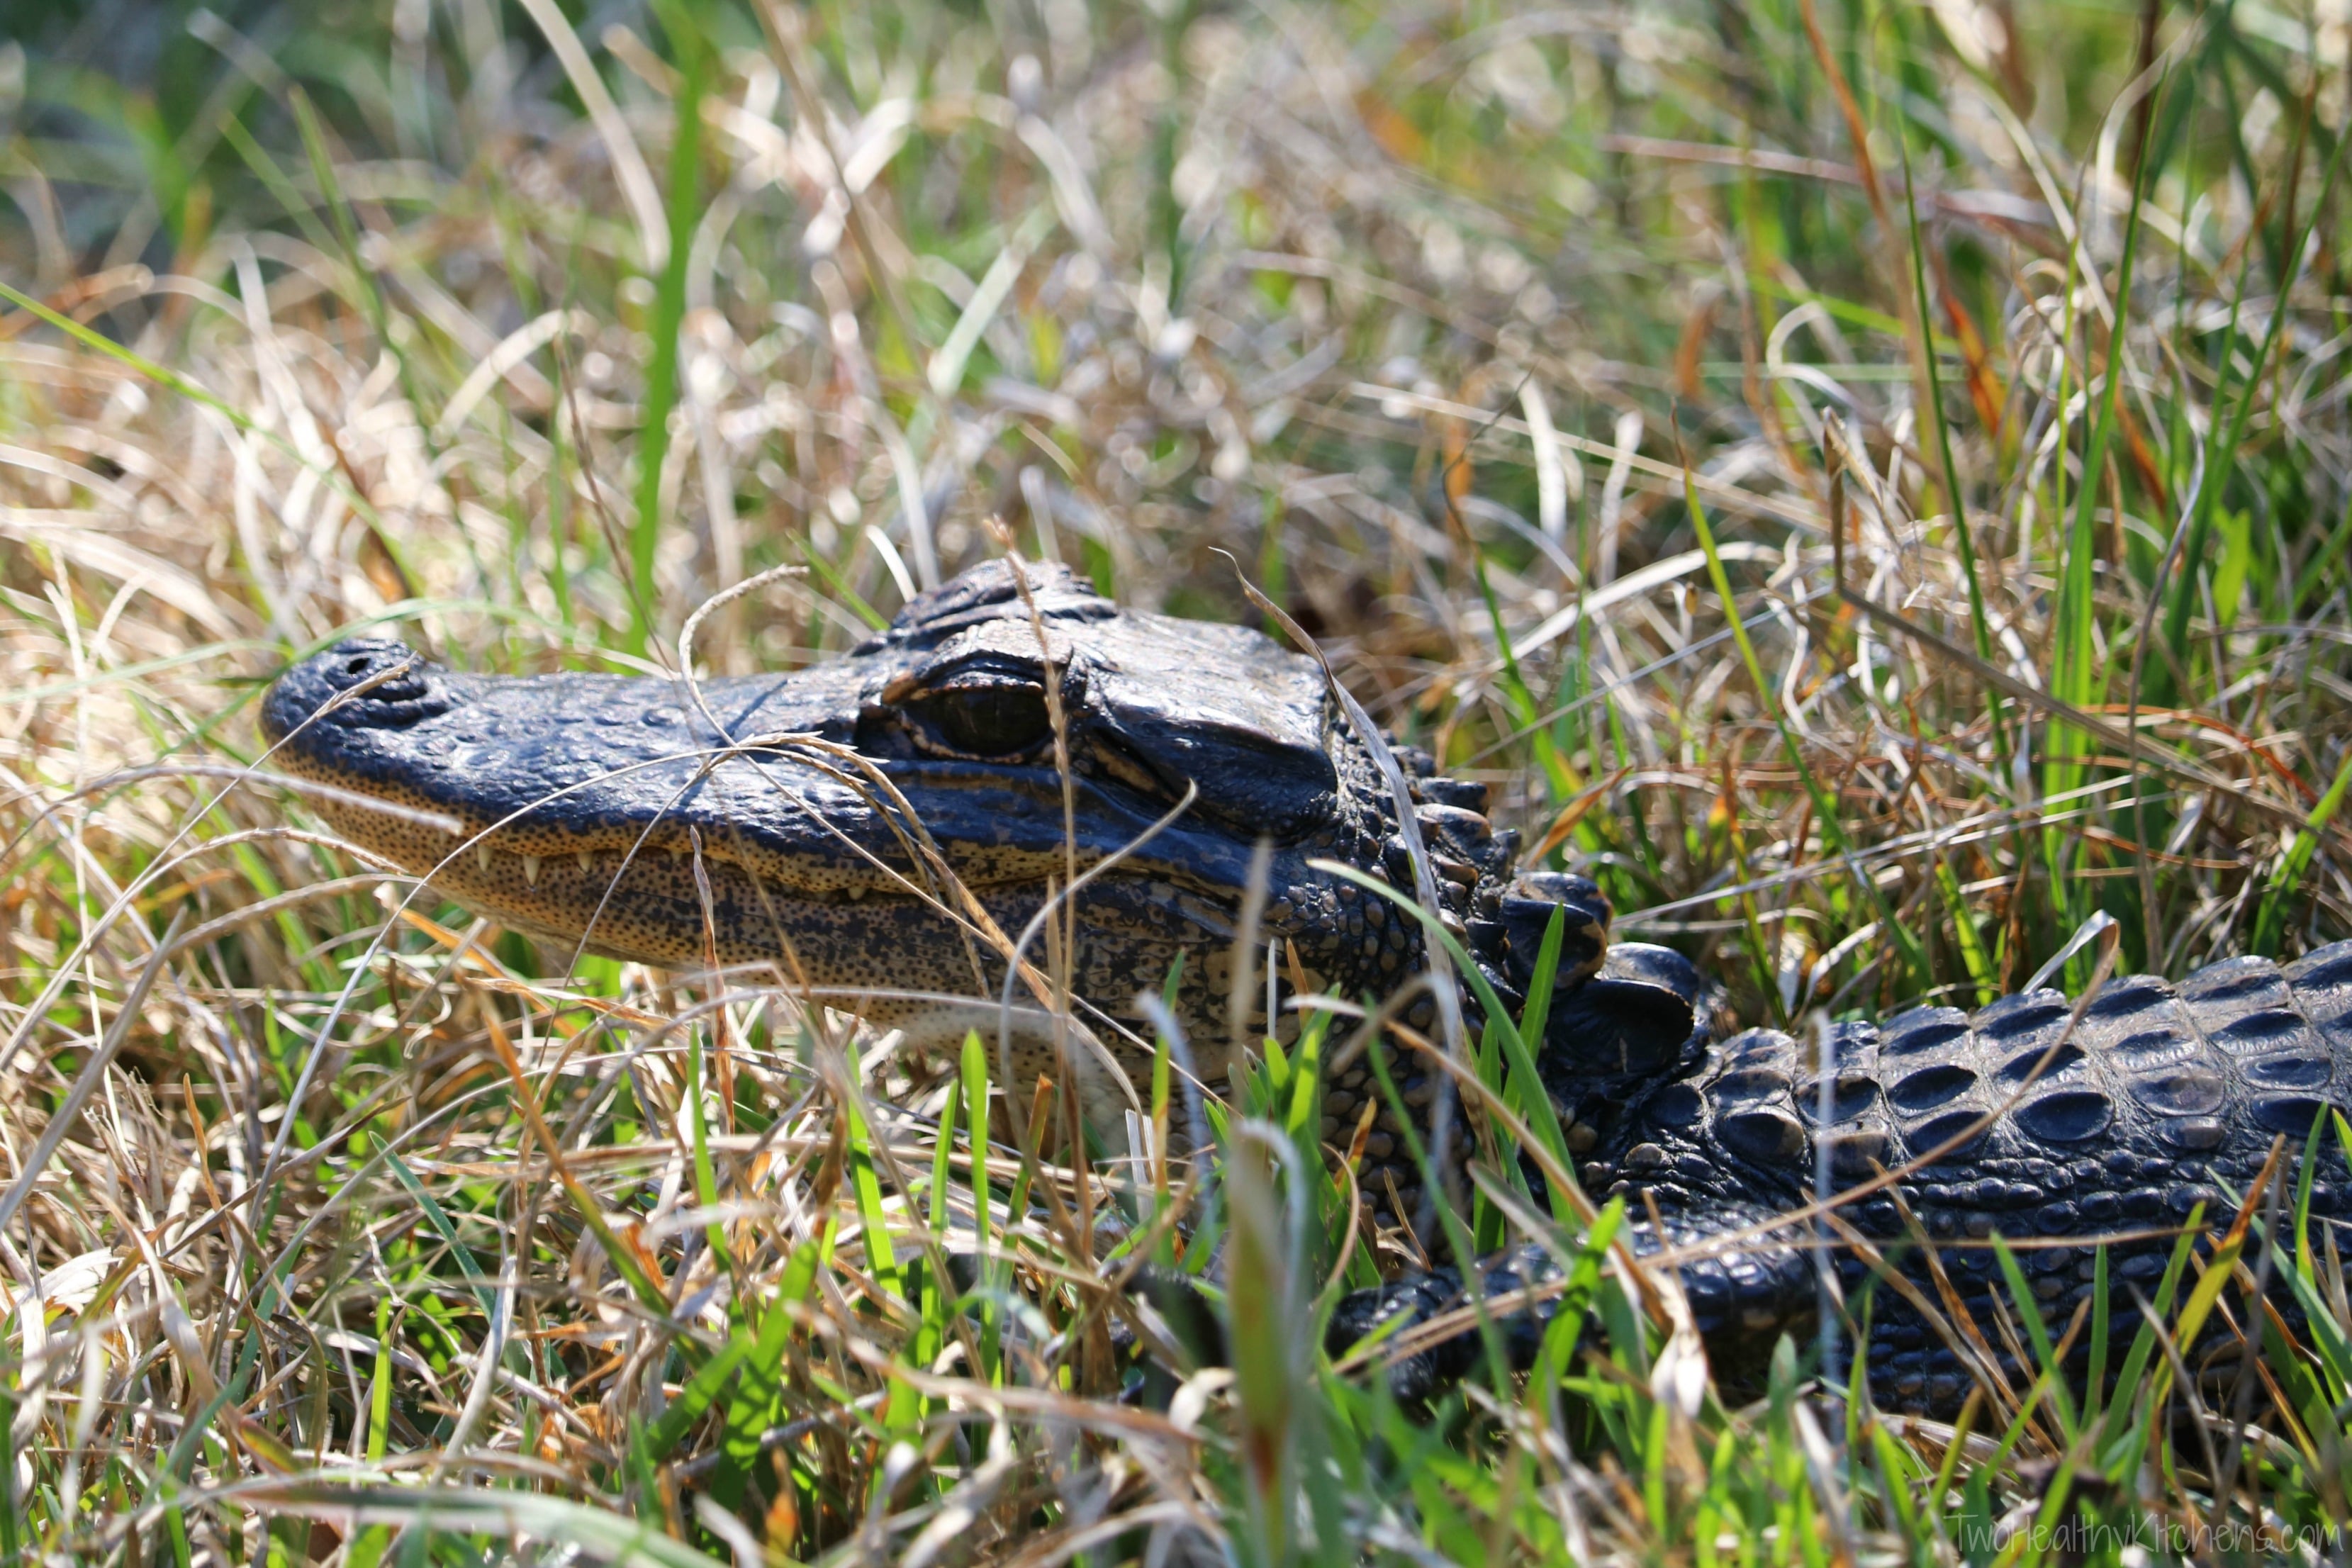 Closeup of head of alligator sunning in the grass. 